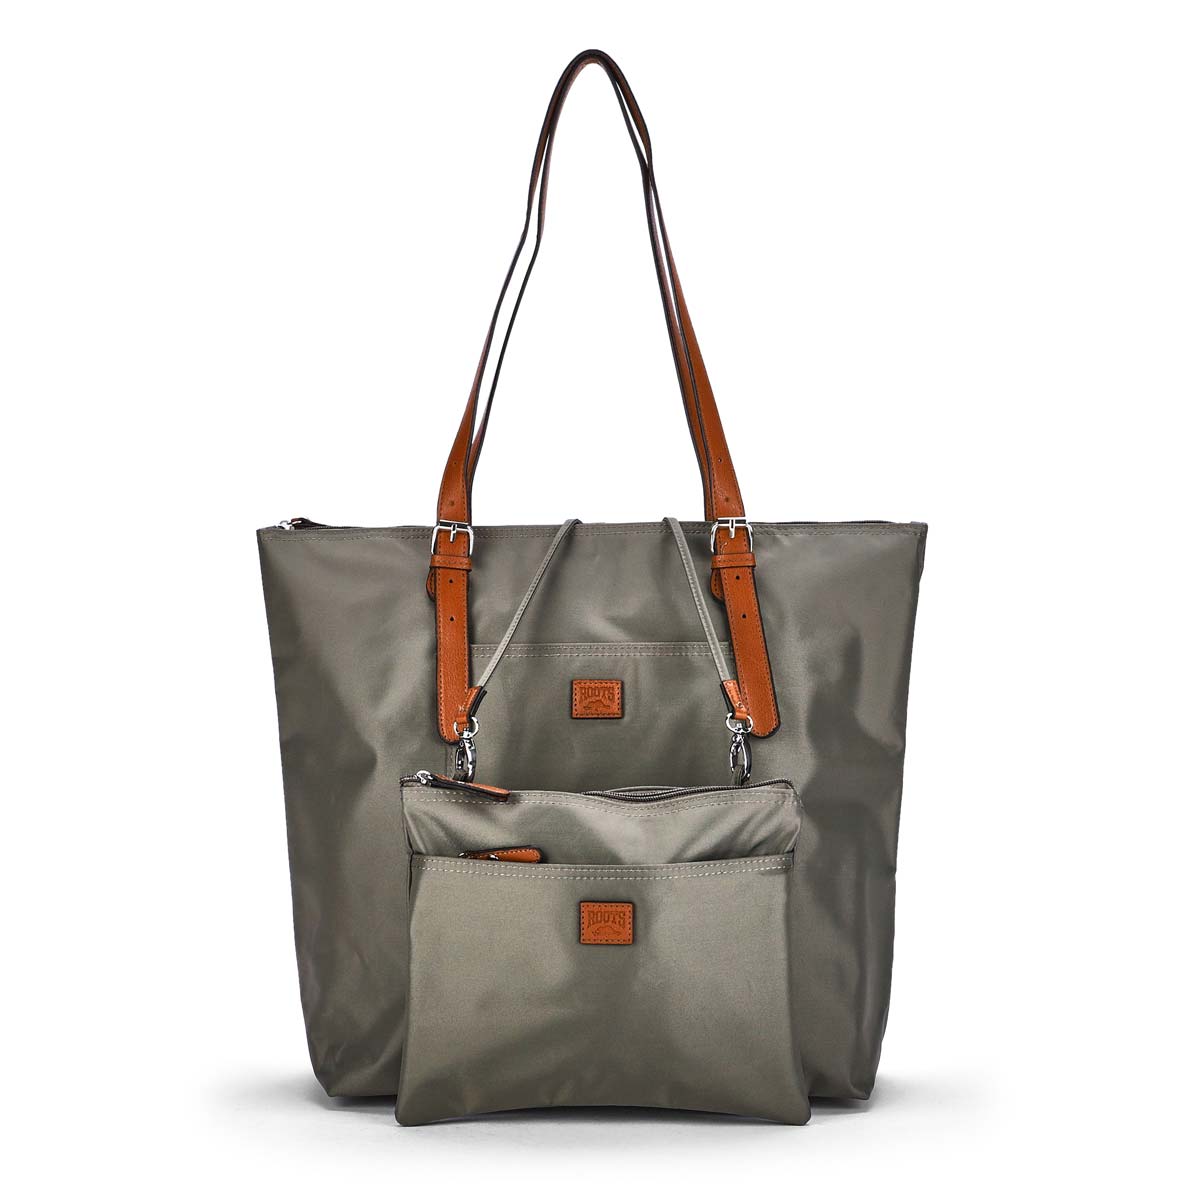 Roots Women's ROOTS73 R4324 kki 2 in 1 tote | Softmoc.com